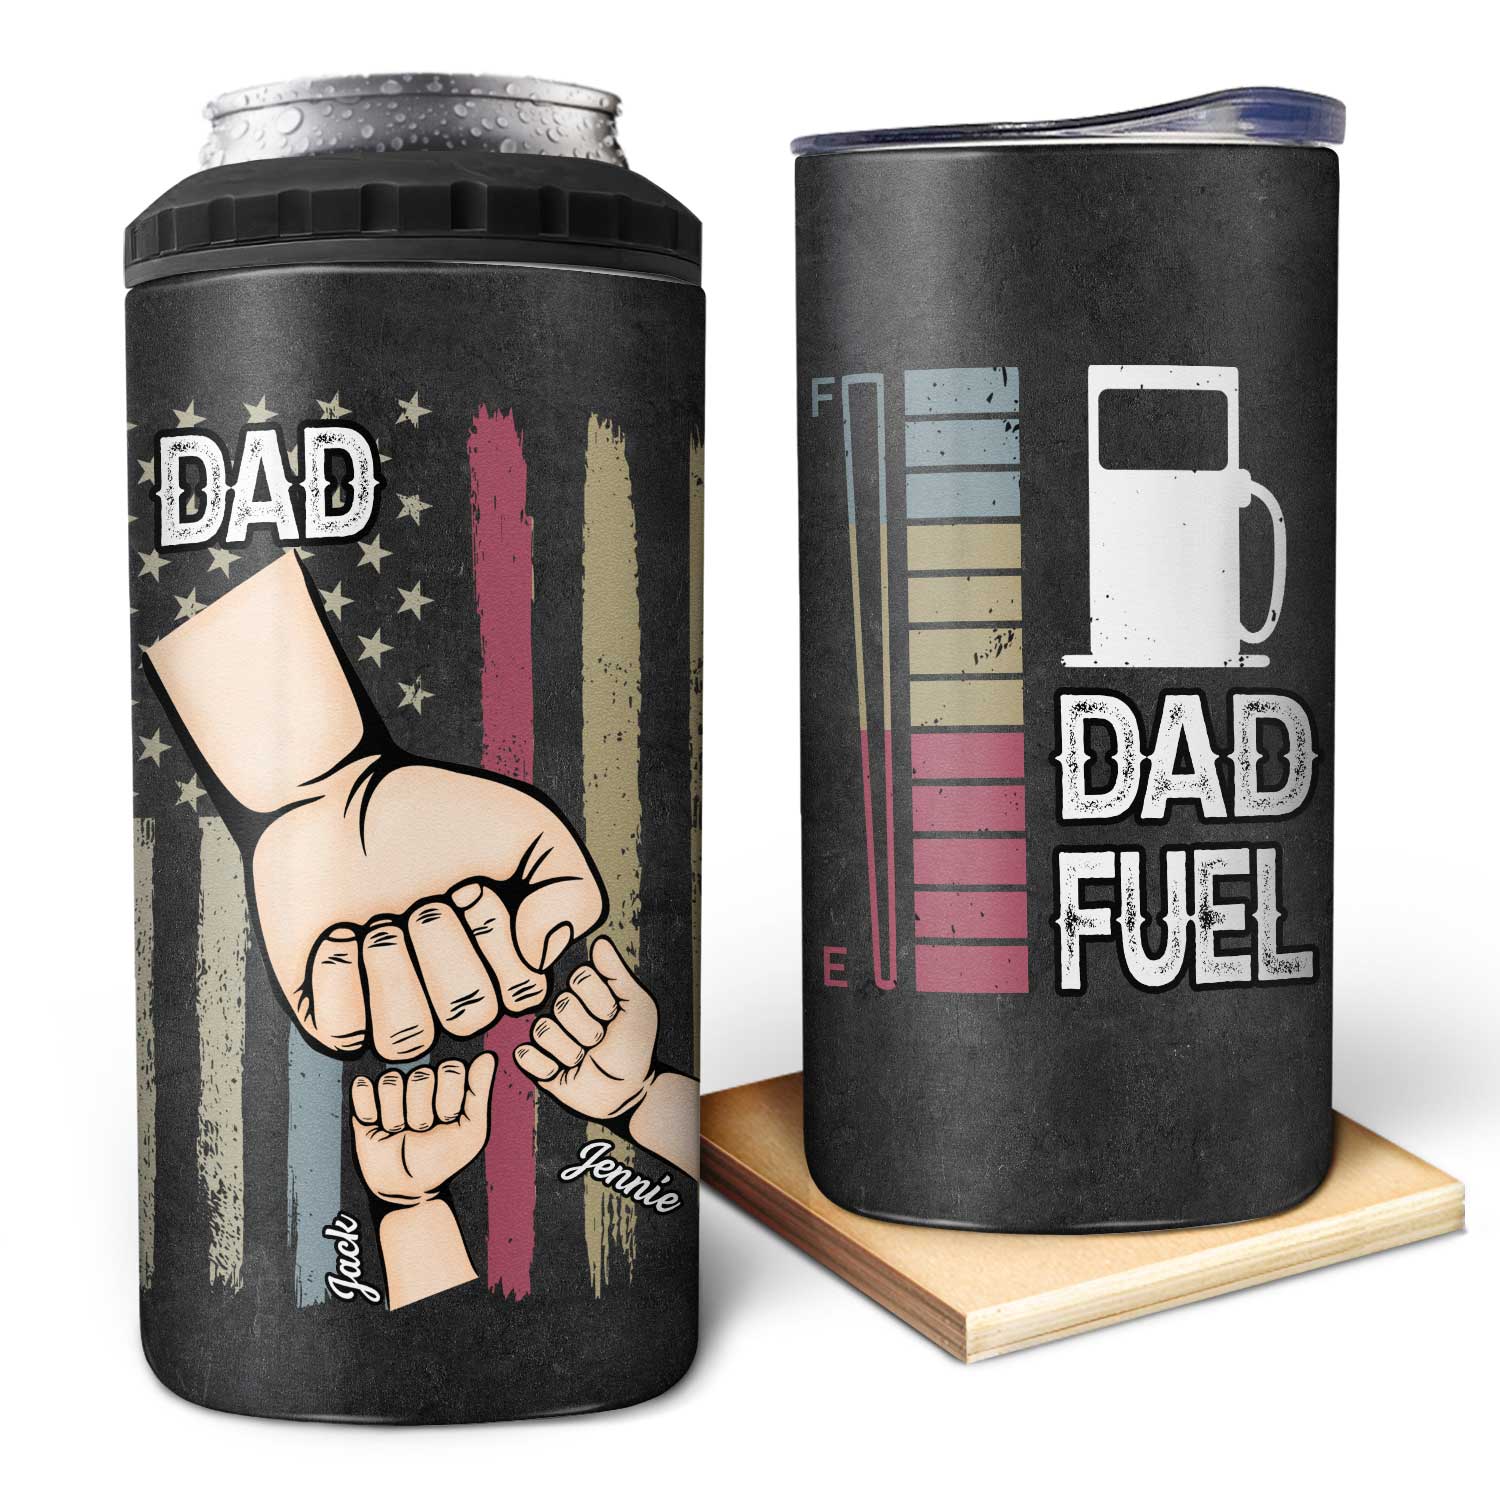 Dad Fuel Grandpa And Kids Fist Bump - Birthday, Loving Gift For Daddy, Father, Grandfather, Husband, Men - Personalized Custom 4 In 1 Can Cooler Tumbler